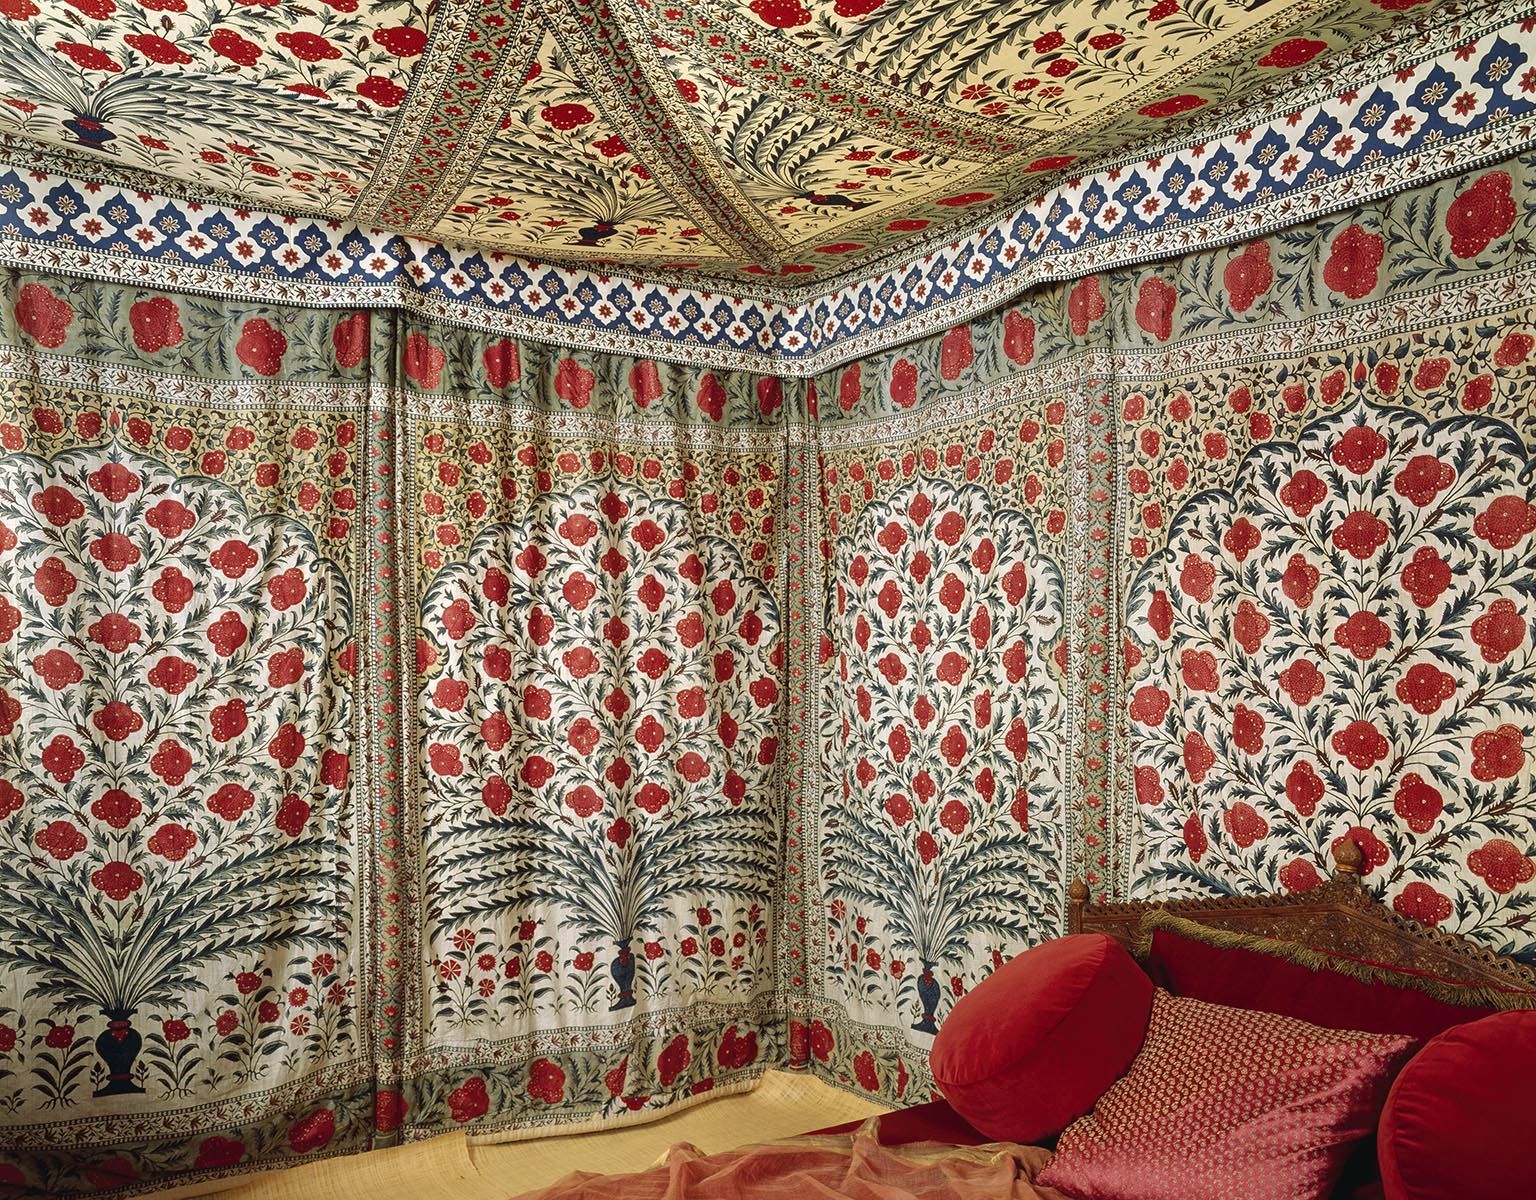 Tent of Tipu Sahib ©Powis Castle and Garden